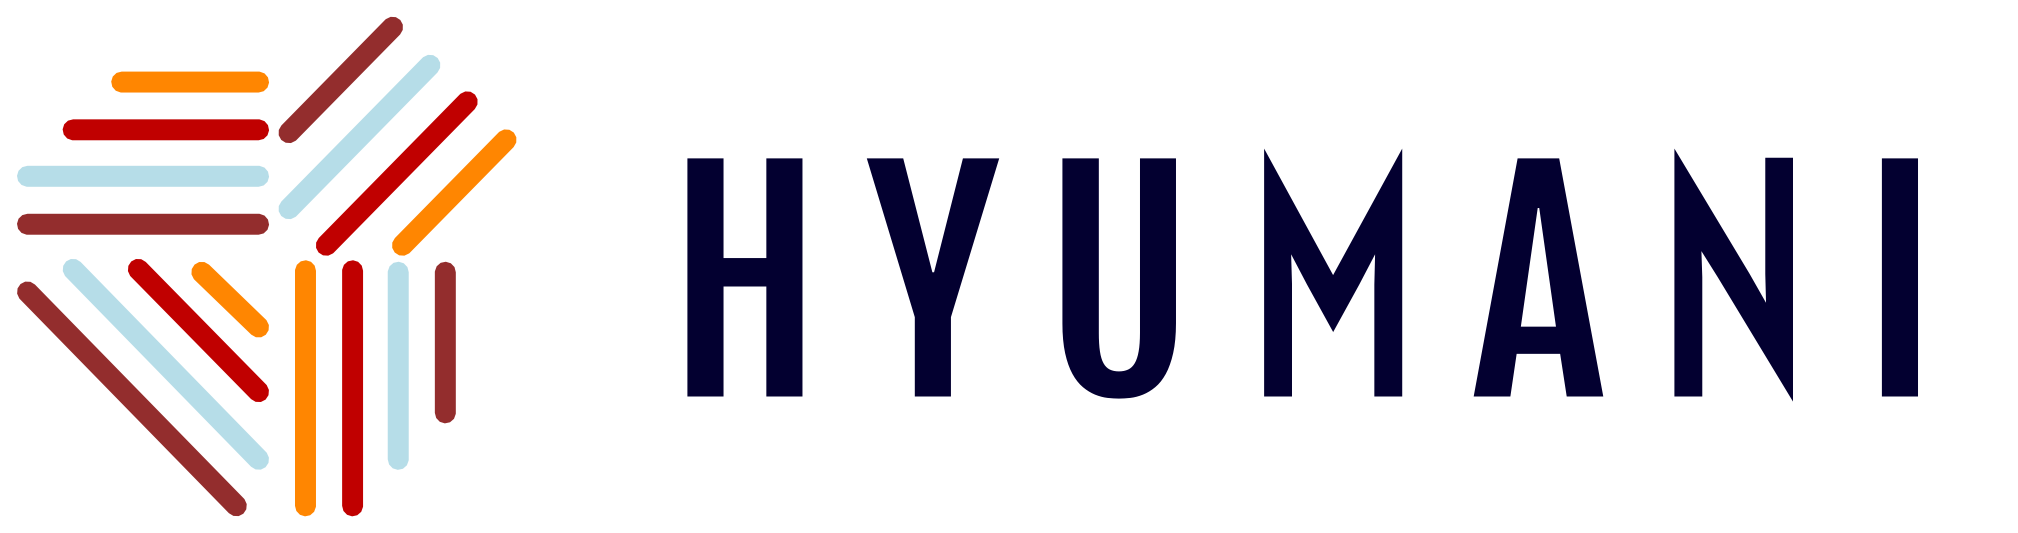 hyumani.com - solution to be effective communicator knowing nature of communication